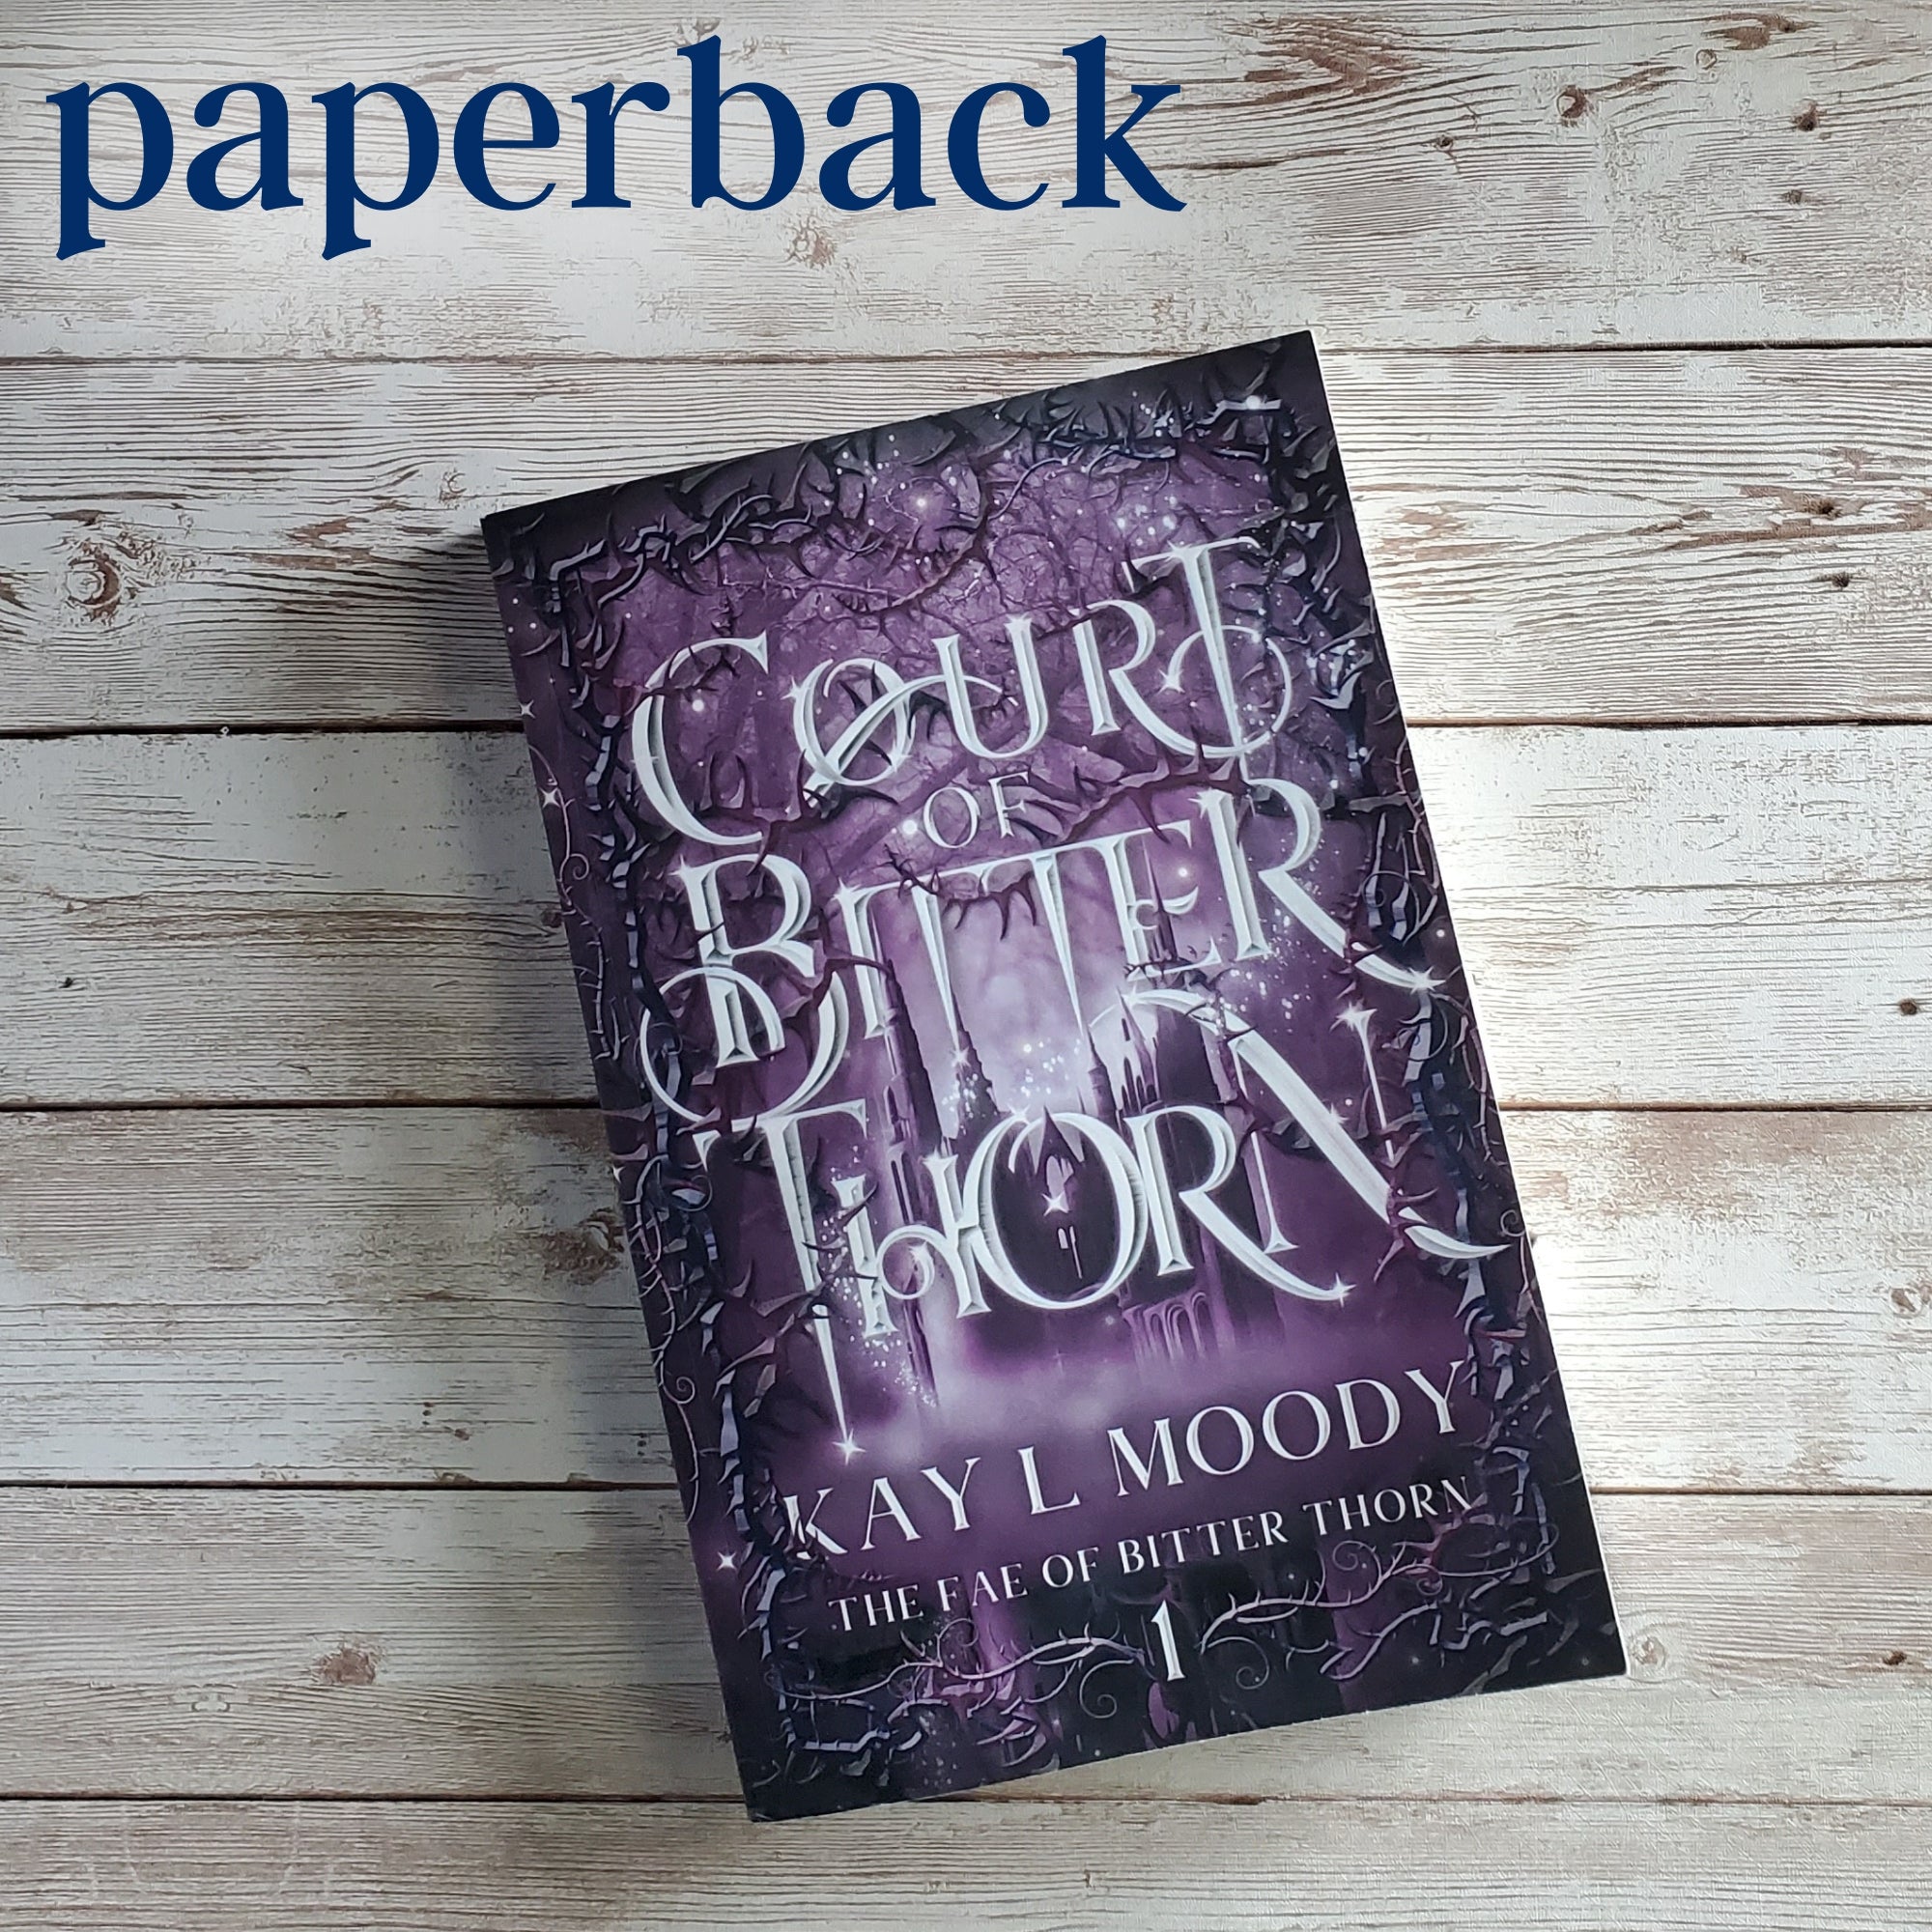 Court of Bitter Thorn (Paperback)